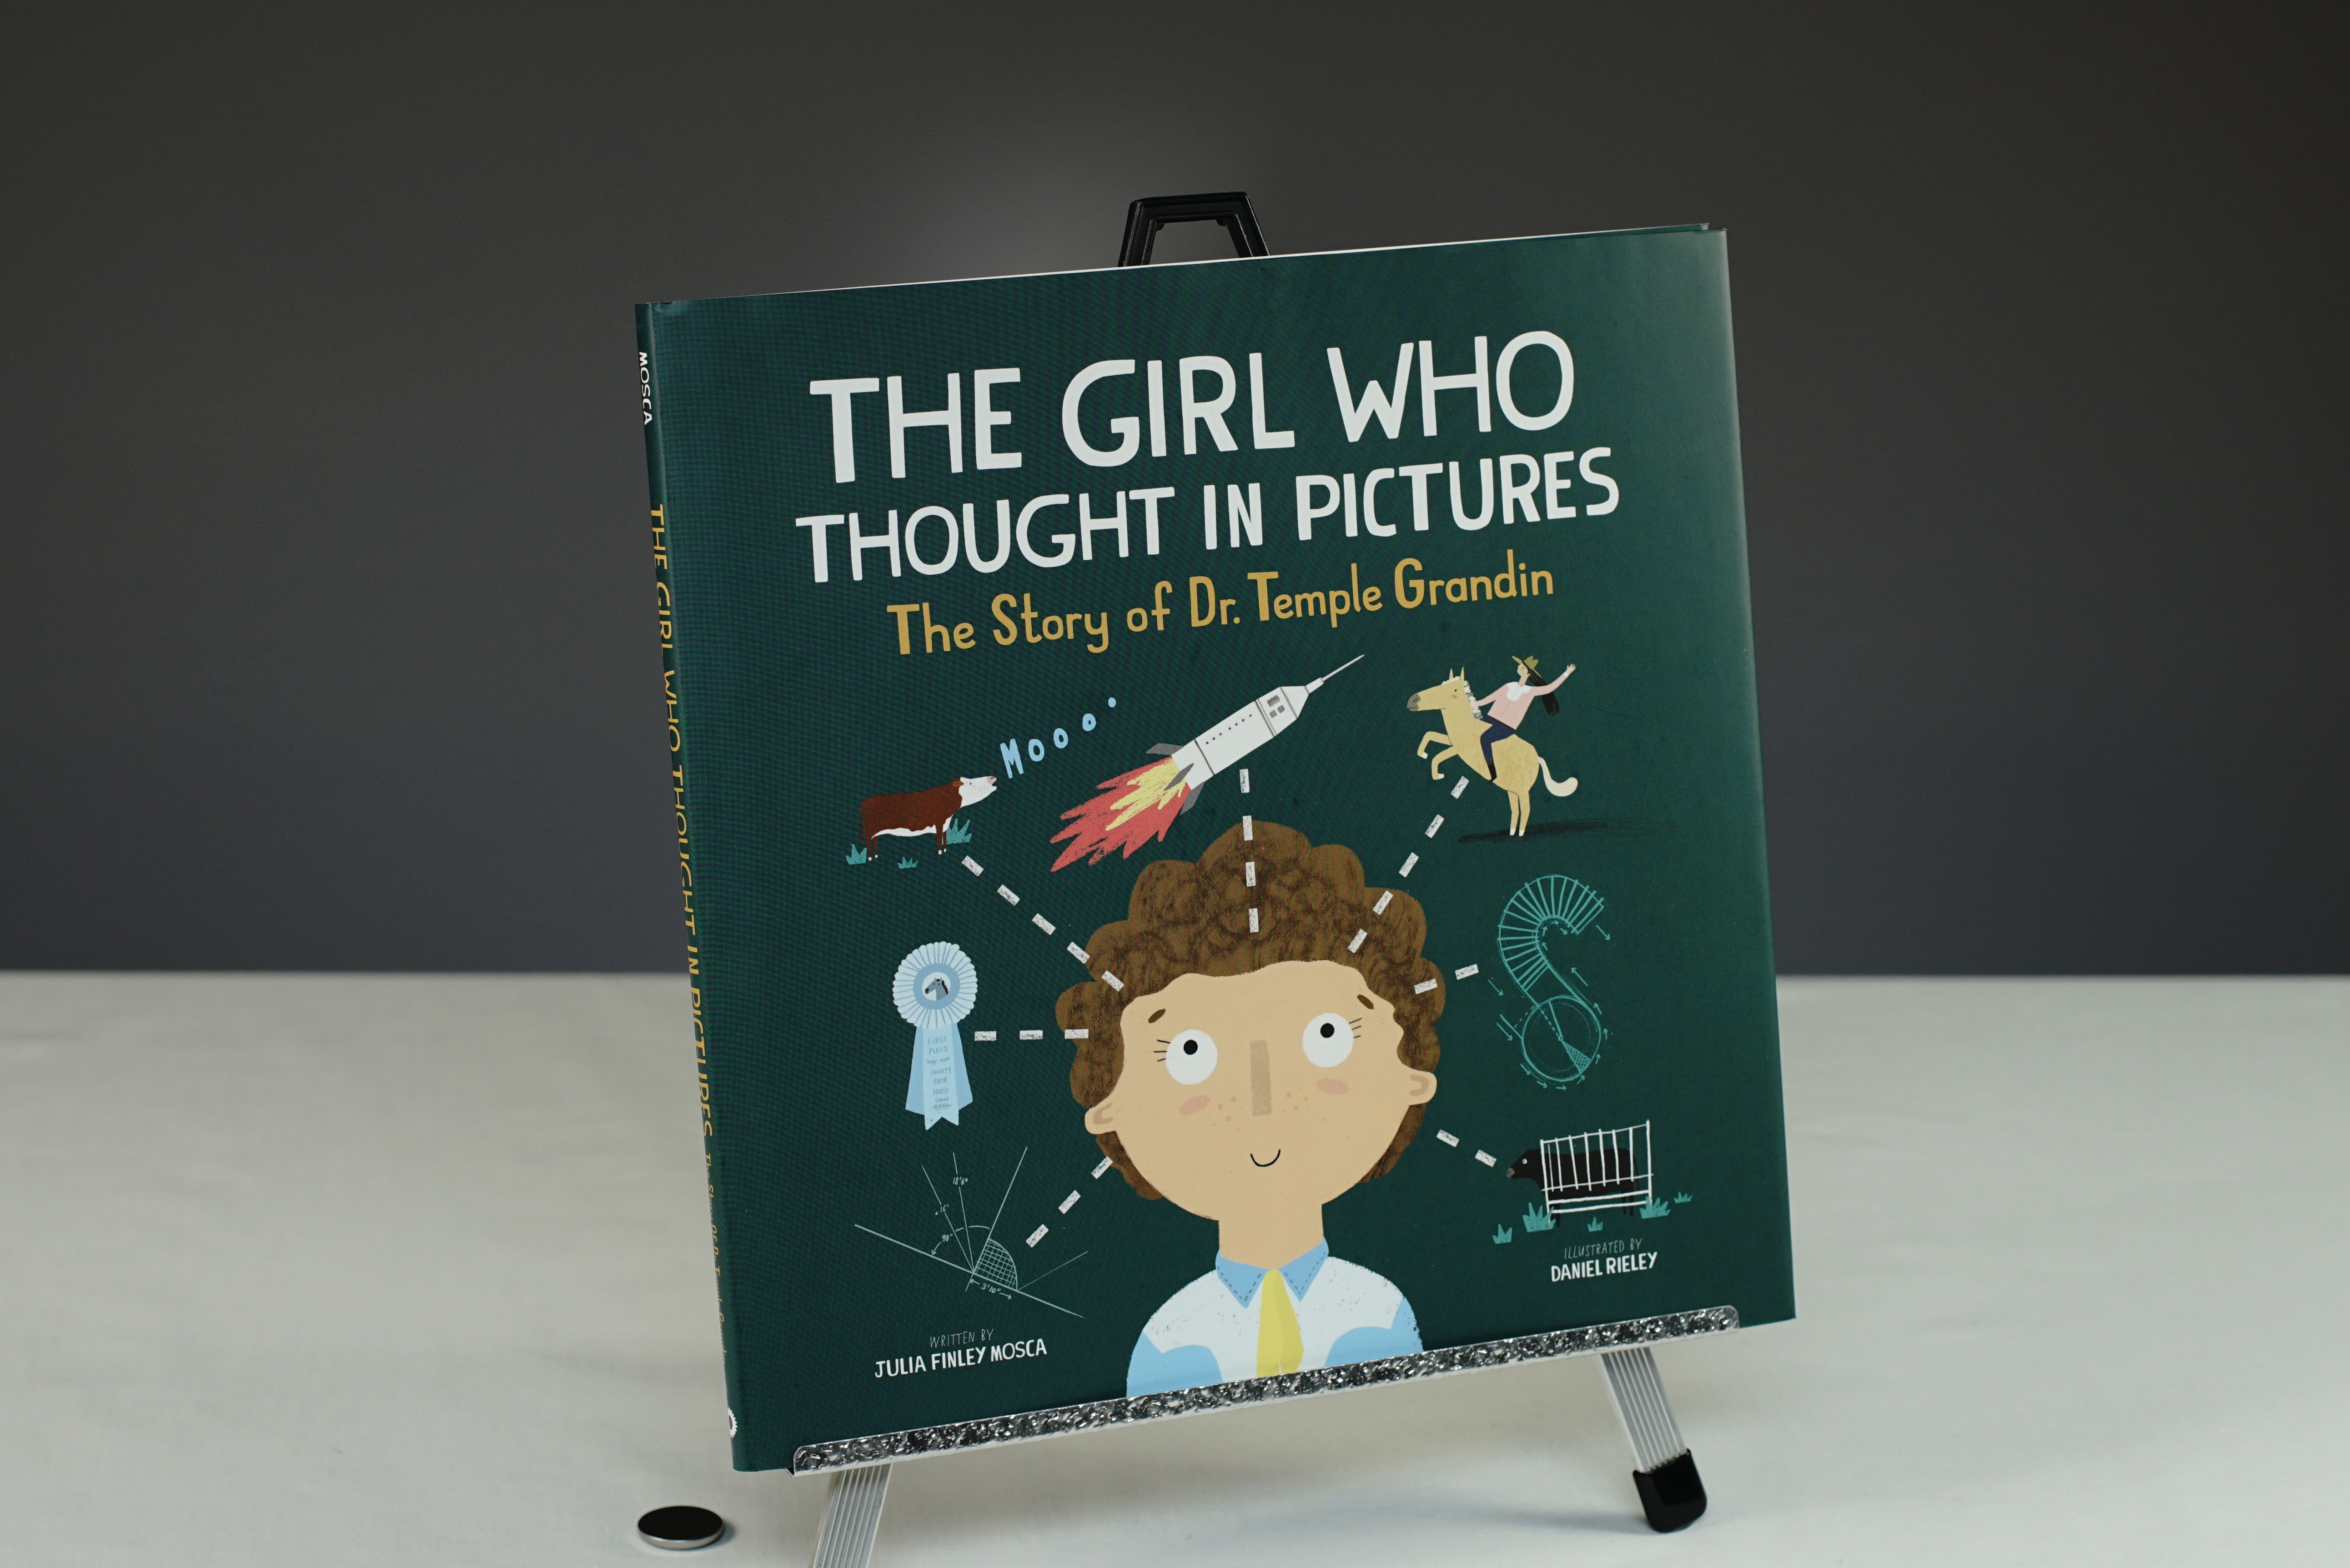 The Girl Who Thought In Pictures - The Story of Dr. Temple Grandin Book